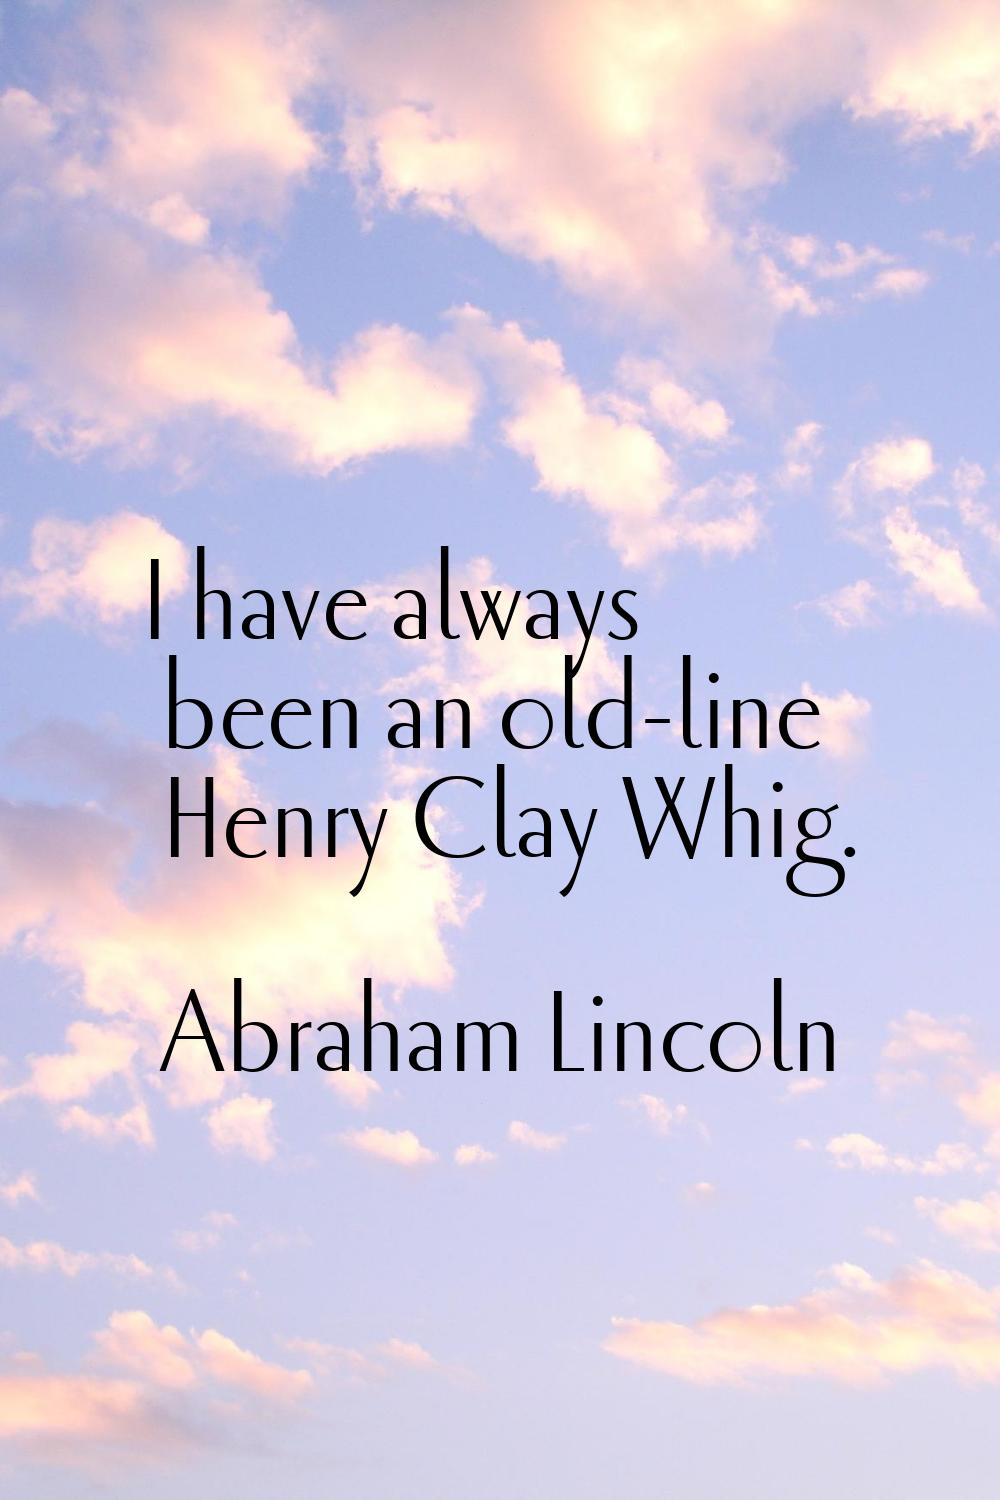 I have always been an old-line Henry Clay Whig.